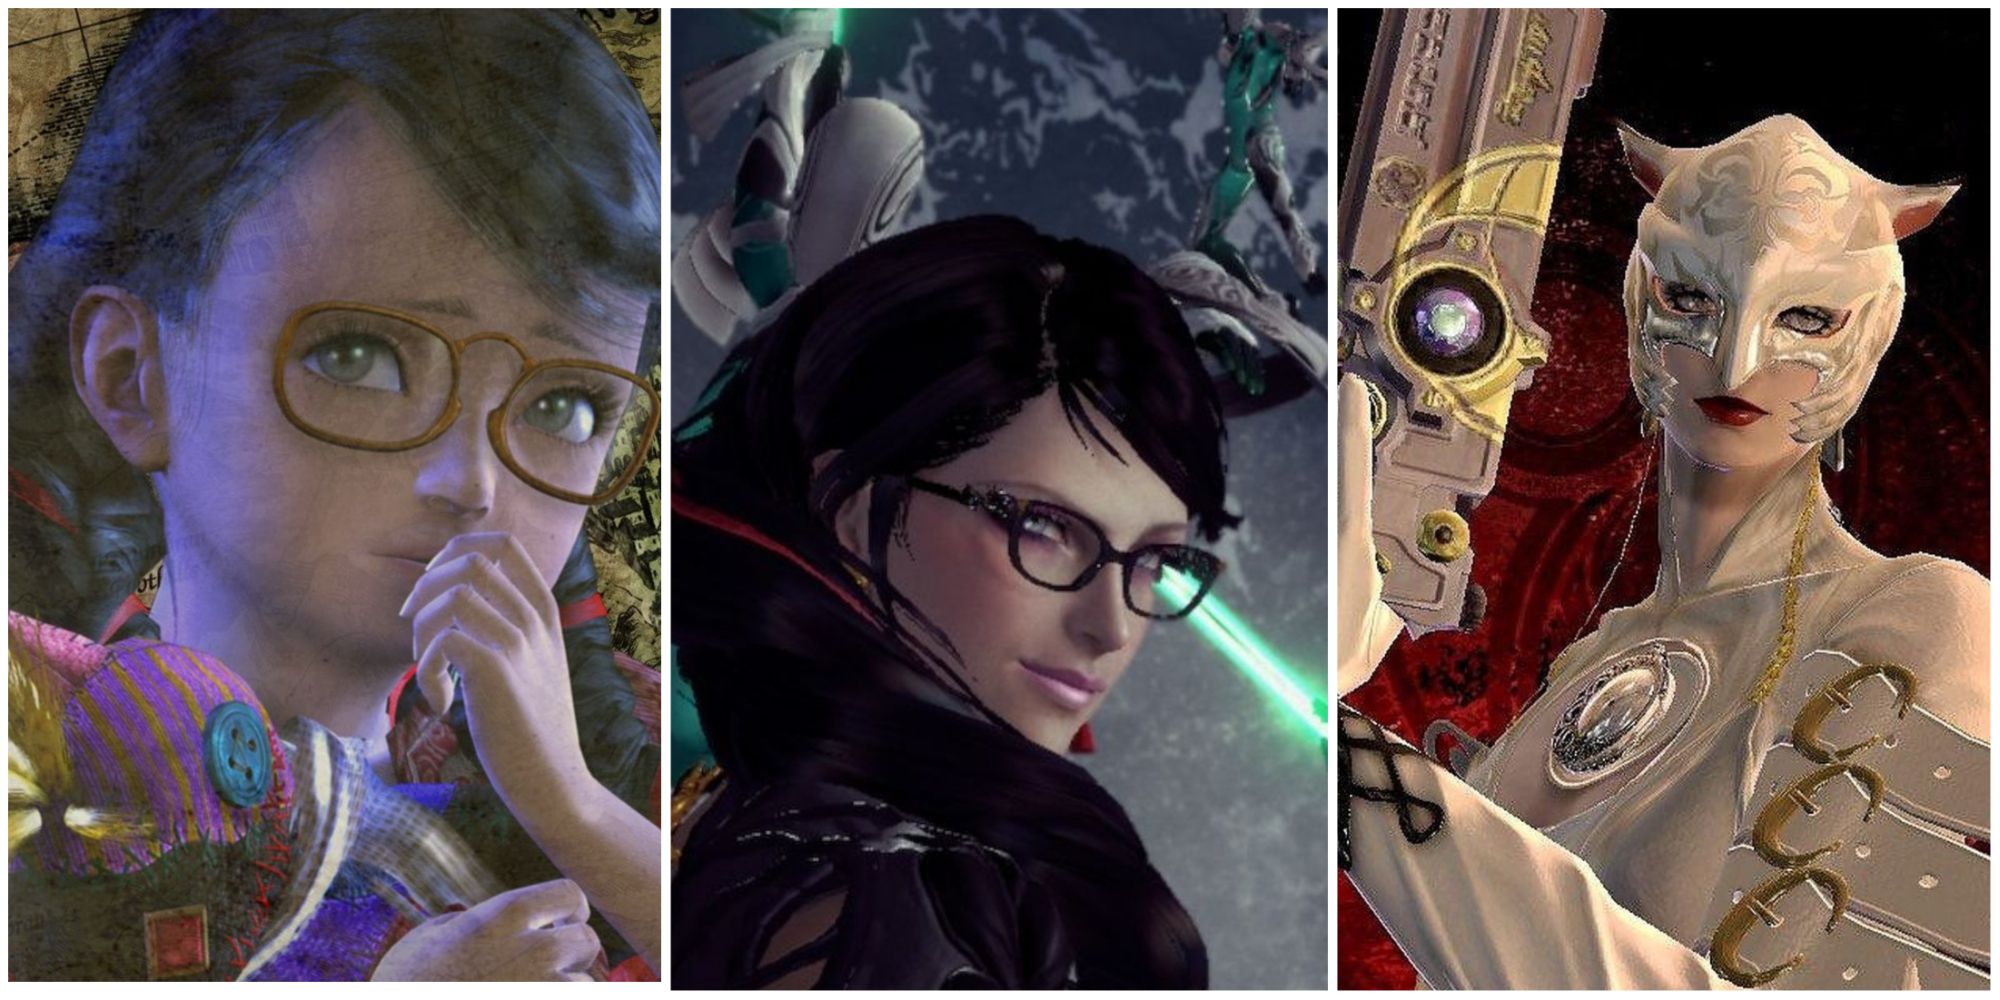 Bayonetta 3 plot twist has fans crying about character assassination